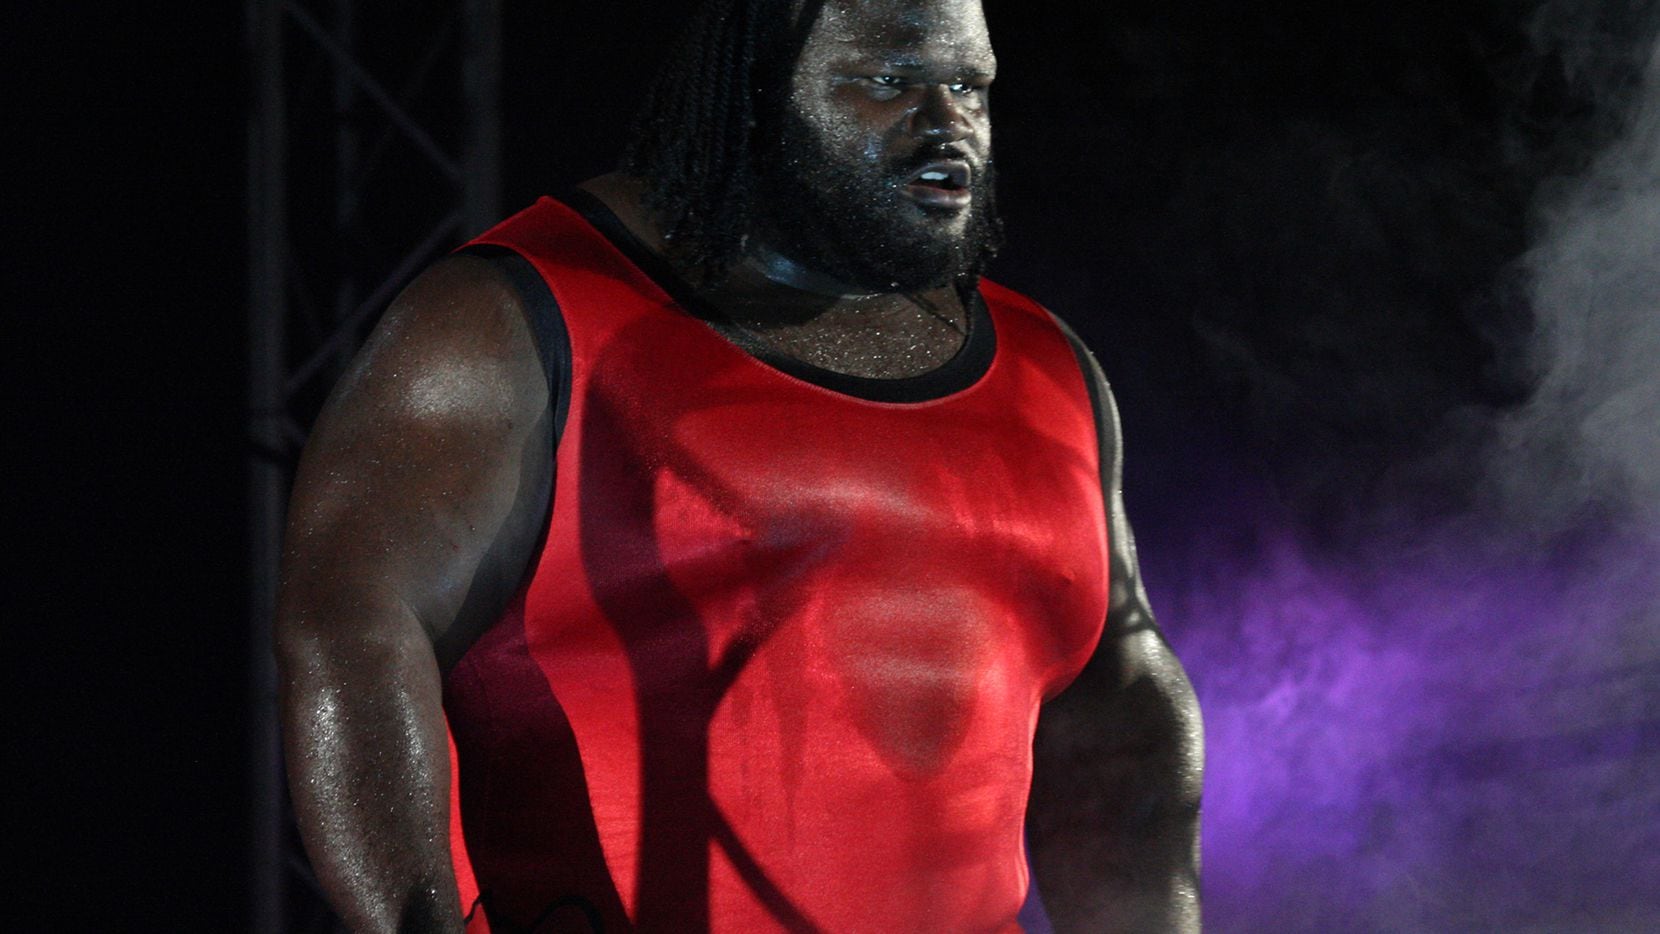 DURBAN, SOUTH AFRICA - JULY 08:  Mark Henry "The World's Strongest Man" is introduced during the WWE Smackdown Live Tour at Westridge Park Tennis Stadium on July 08, 2011 in Durban, South Africa.  (Photo by Steve Haag/Gallo Images/Getty Images)